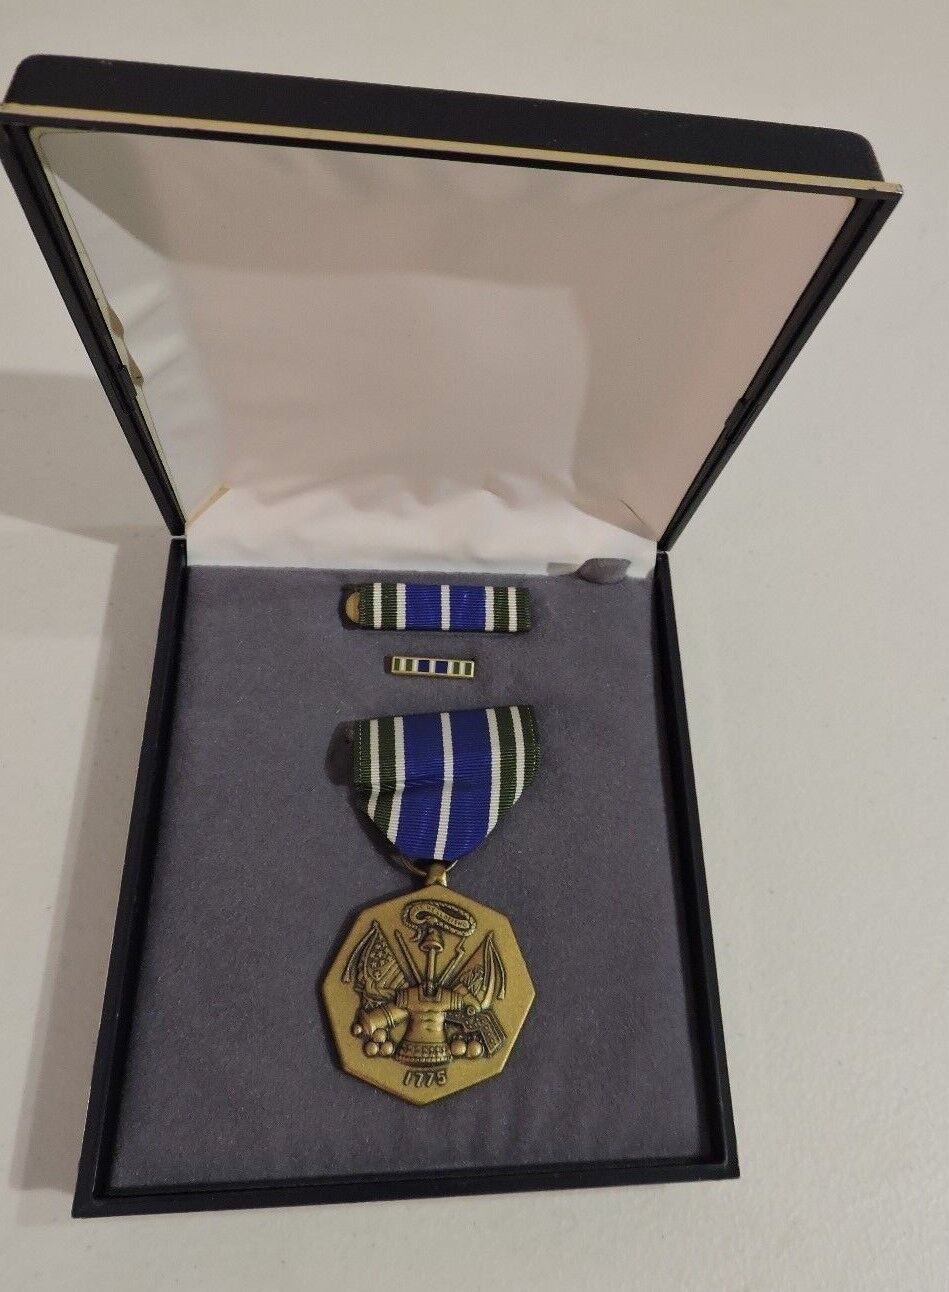 U.S. ARMY BRONZE MILITARY ACHIEVEMENT MEDAL WITH RIBBON AND PRESENTATION BOX